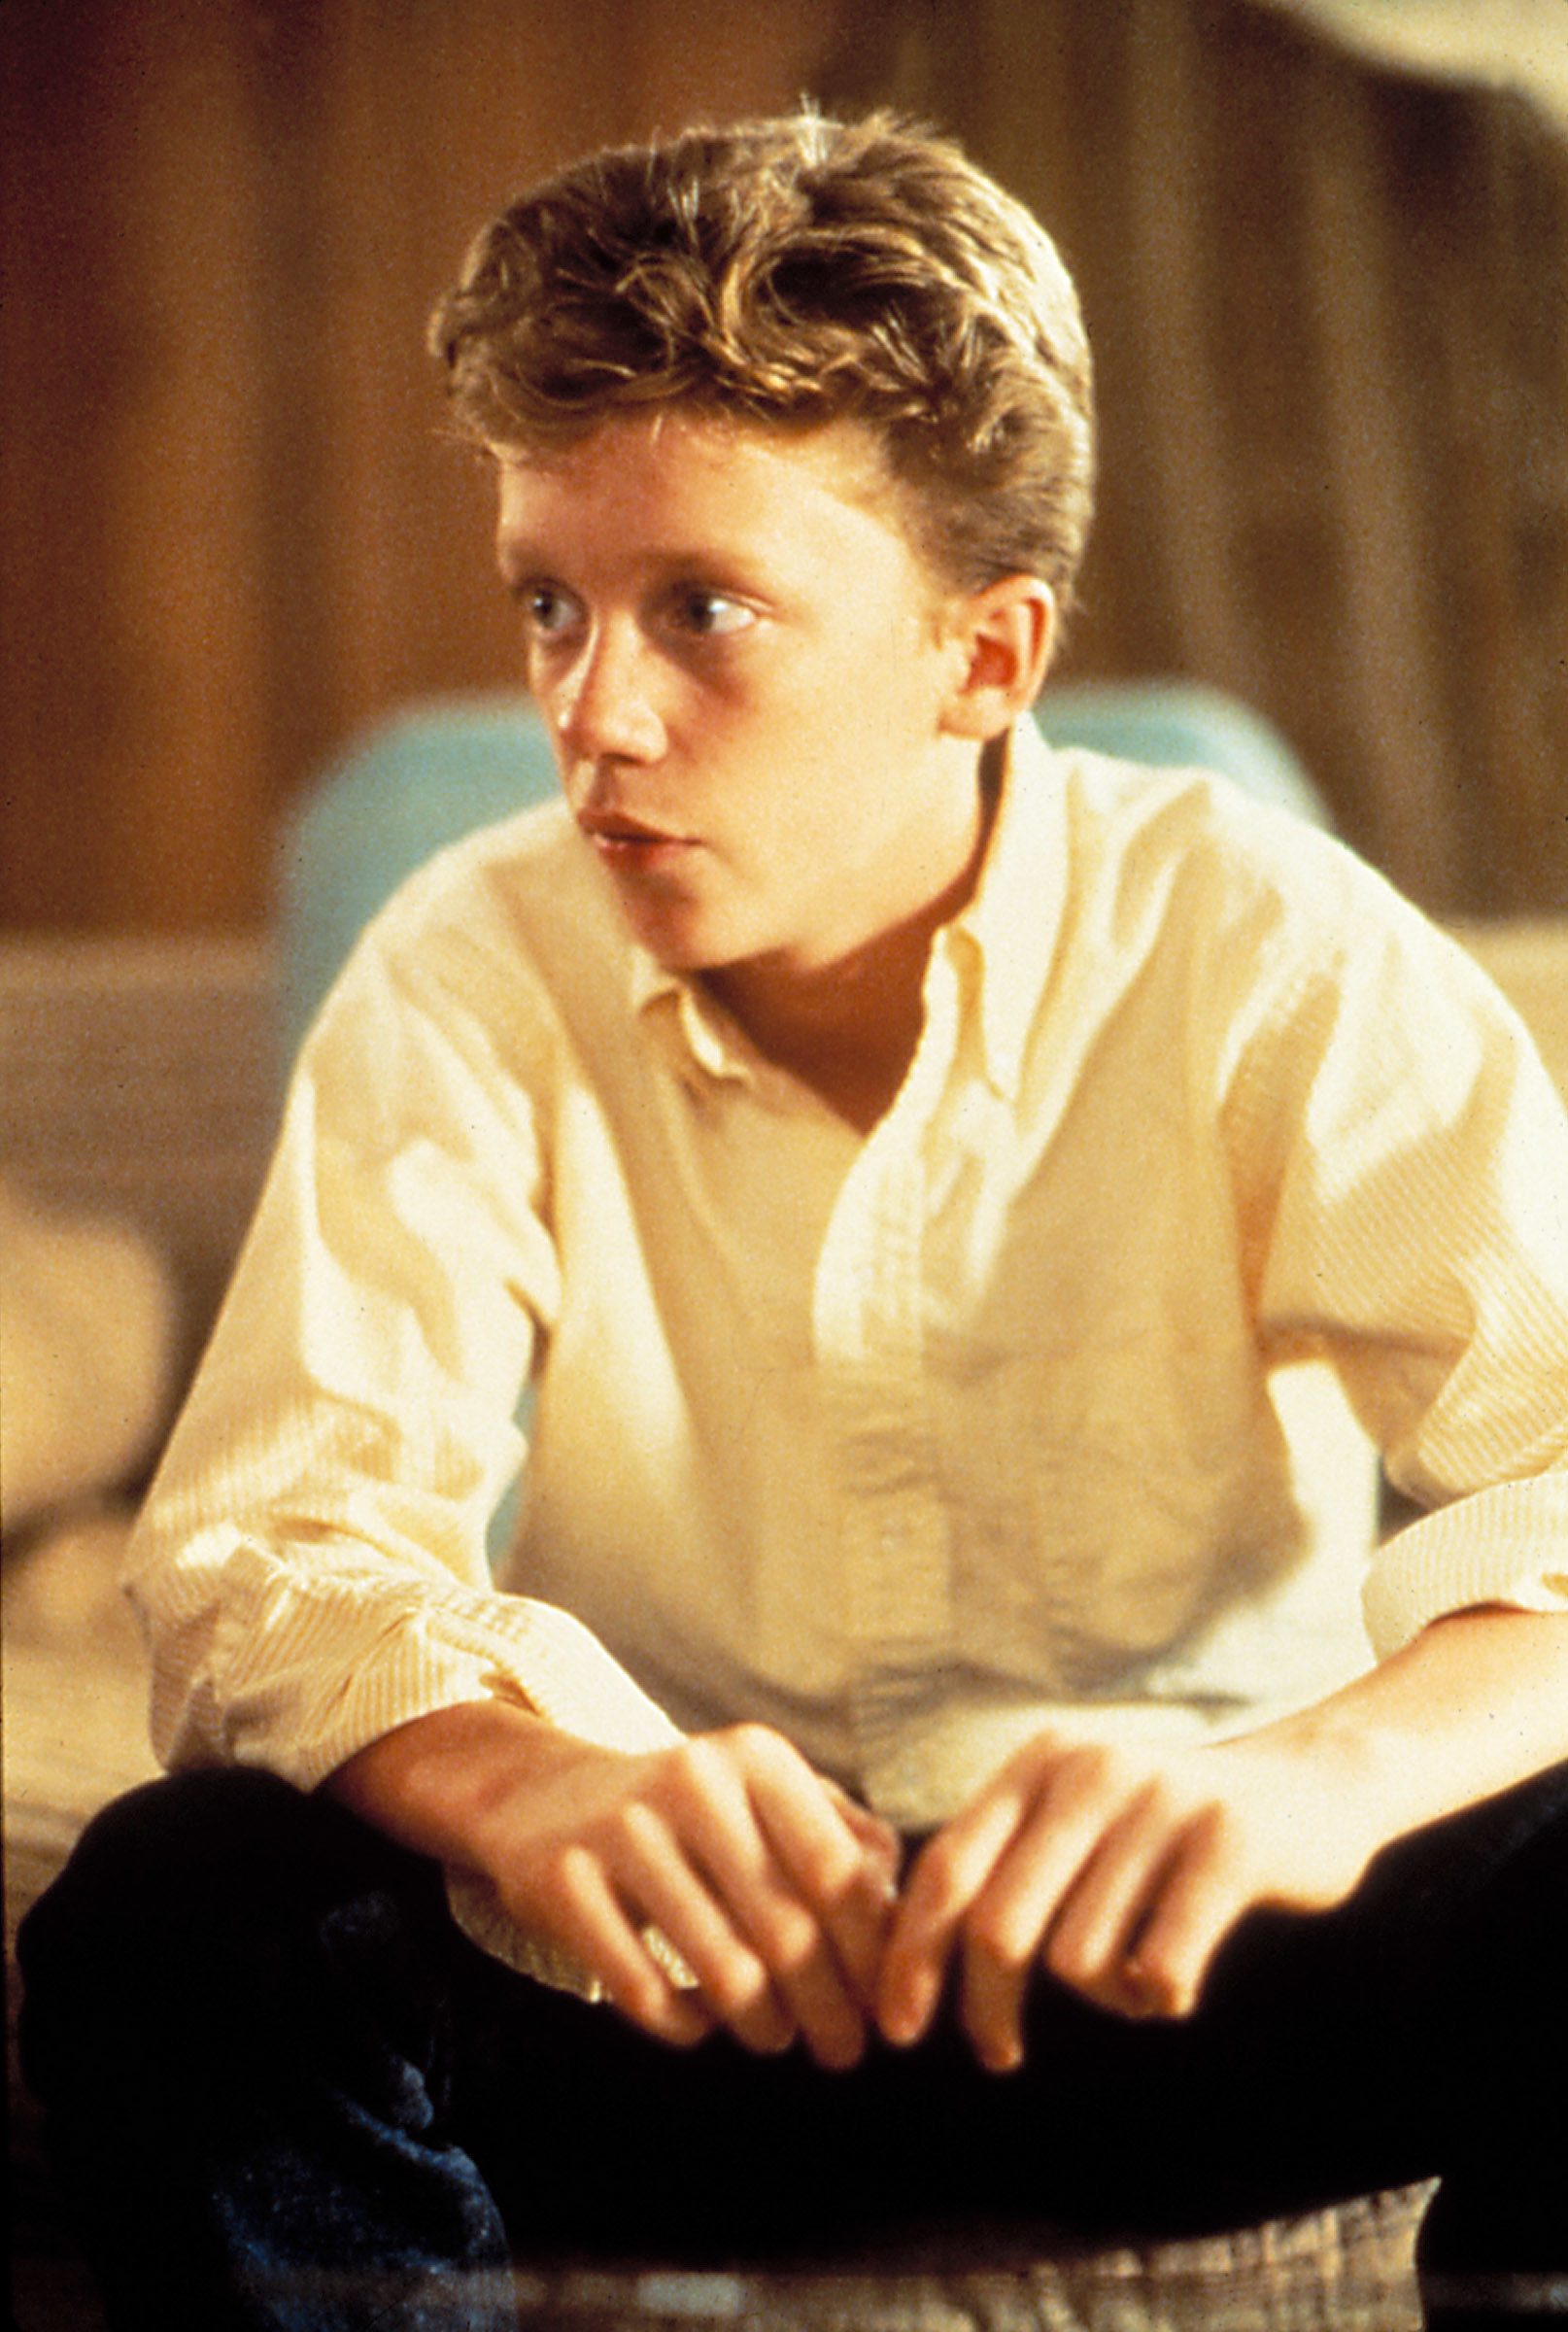 Hall as a teenager in &quot;Sixteen Candles&quot;